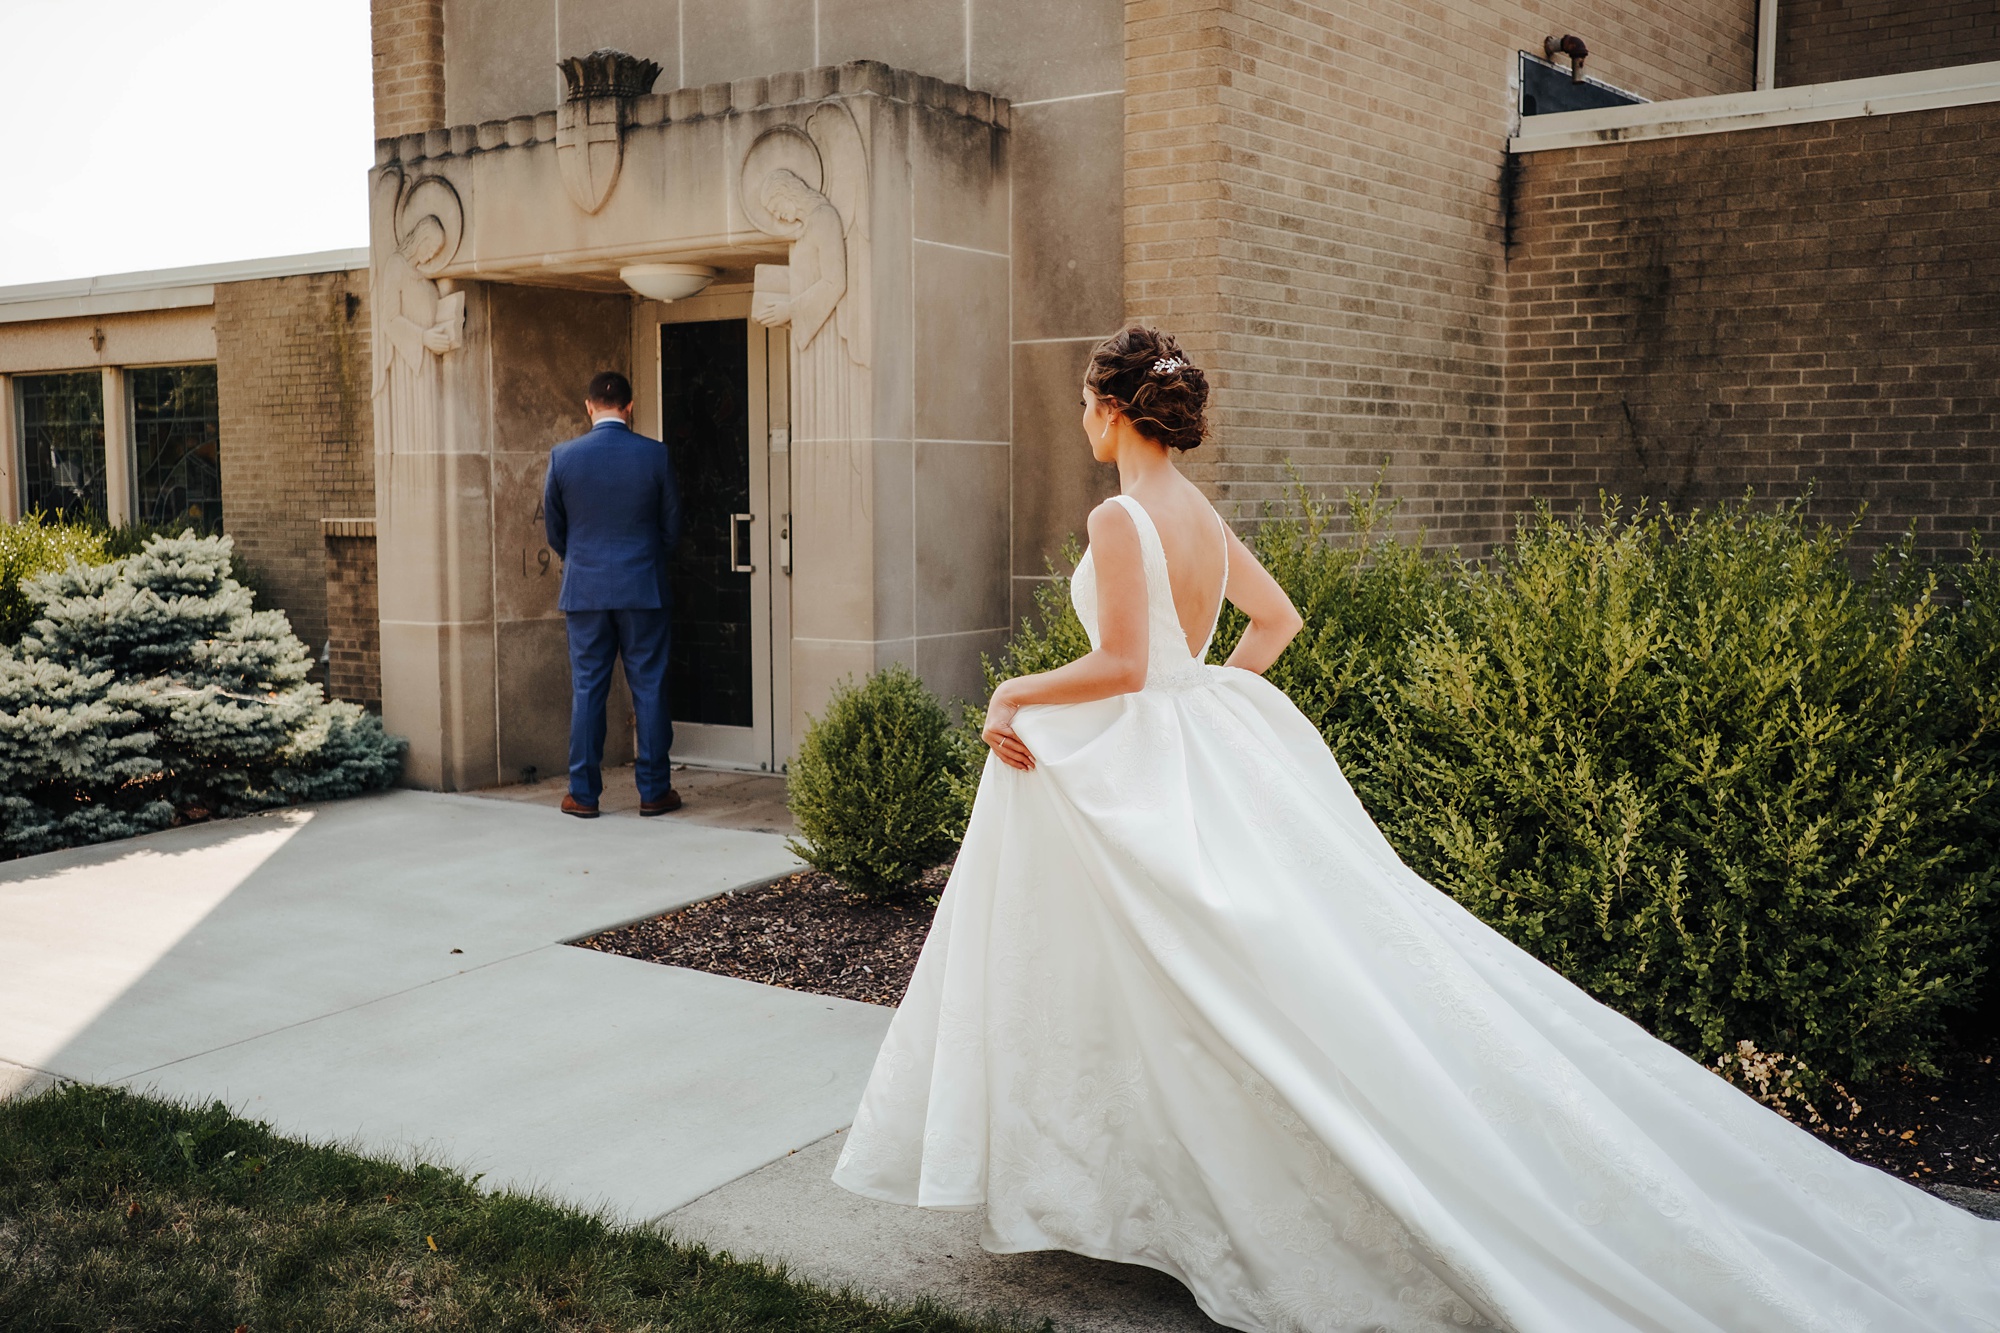 bride approaches groom for first look outside church